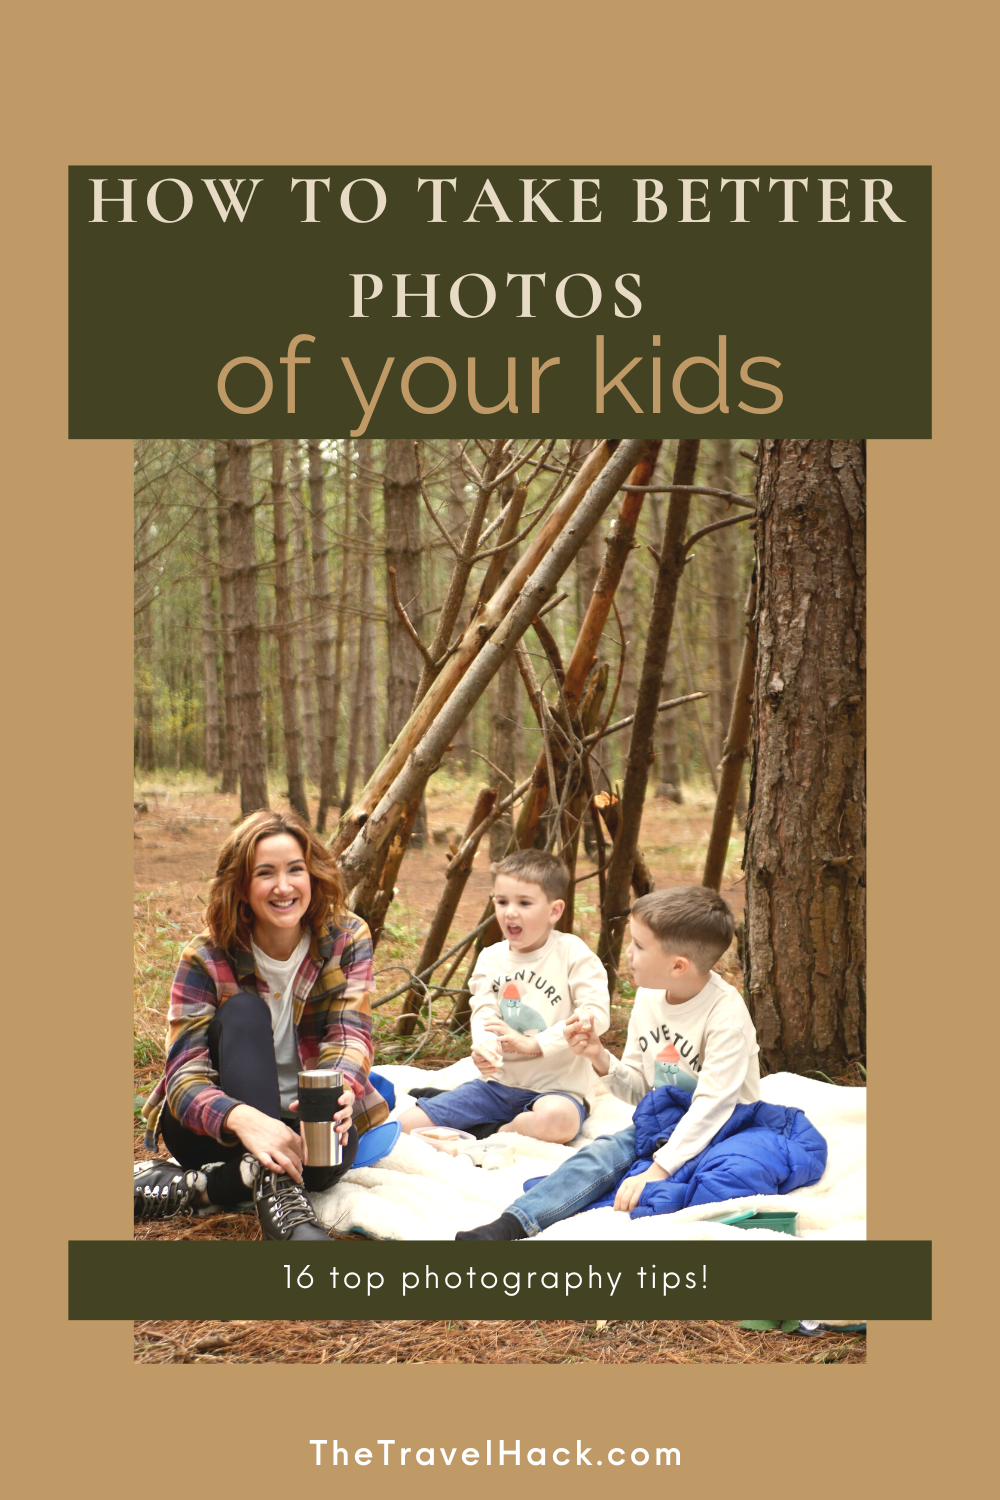 16 tips to take great photos of your kids on holiday